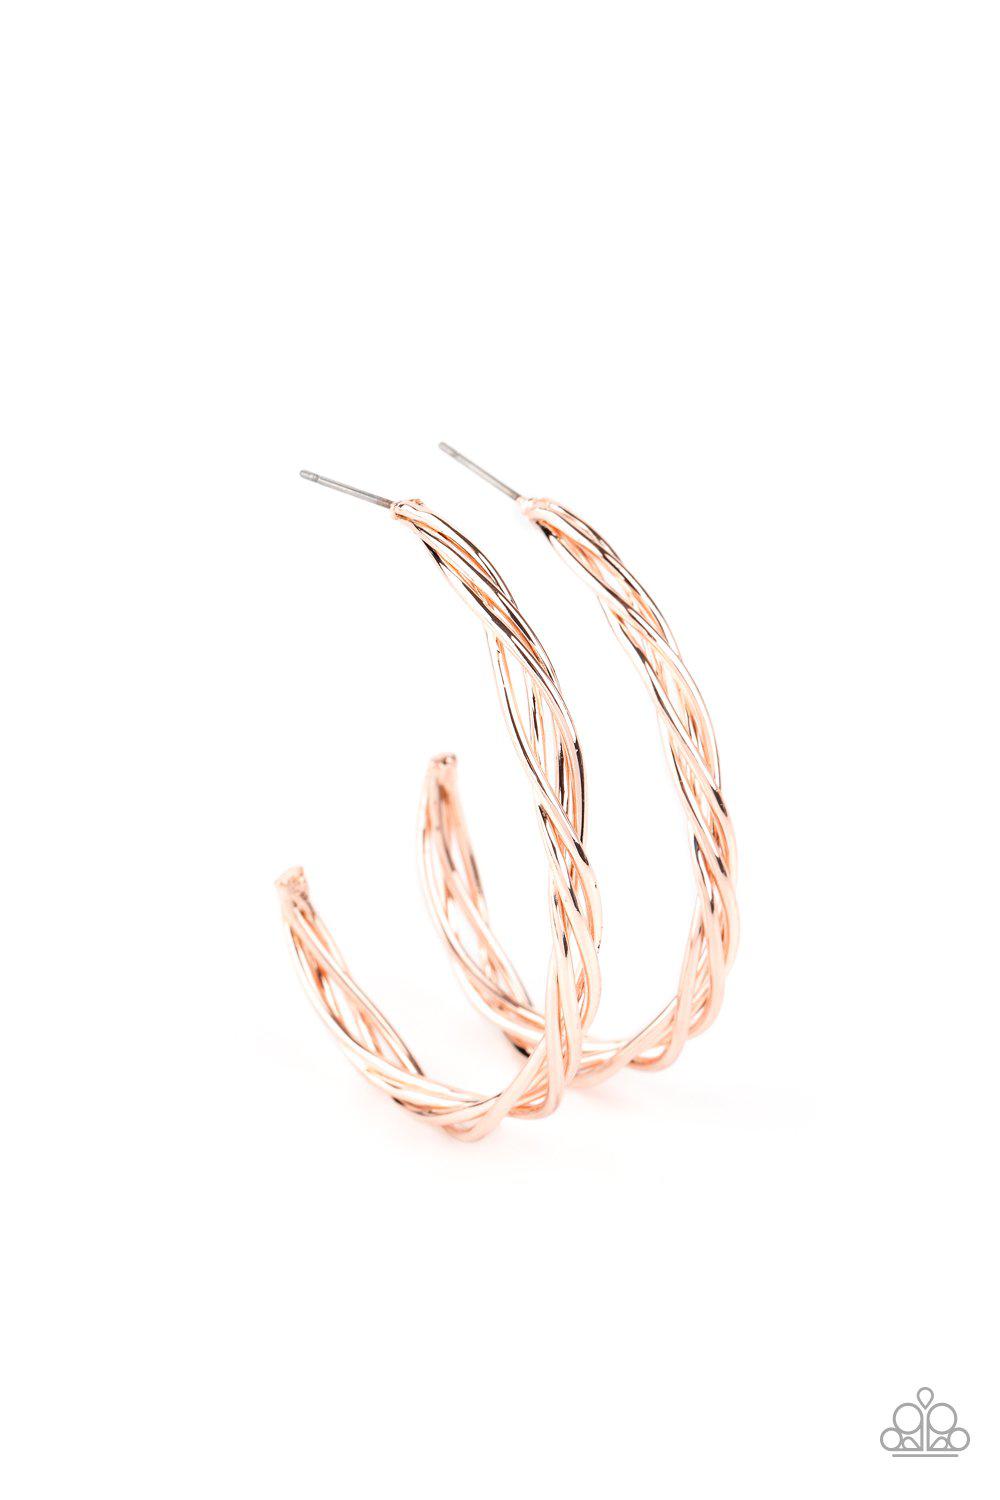 Twisted Tango Rose Gold Hoop Earrings - Paparazzi Accessories-CarasShop.com - $5 Jewelry by Cara Jewels